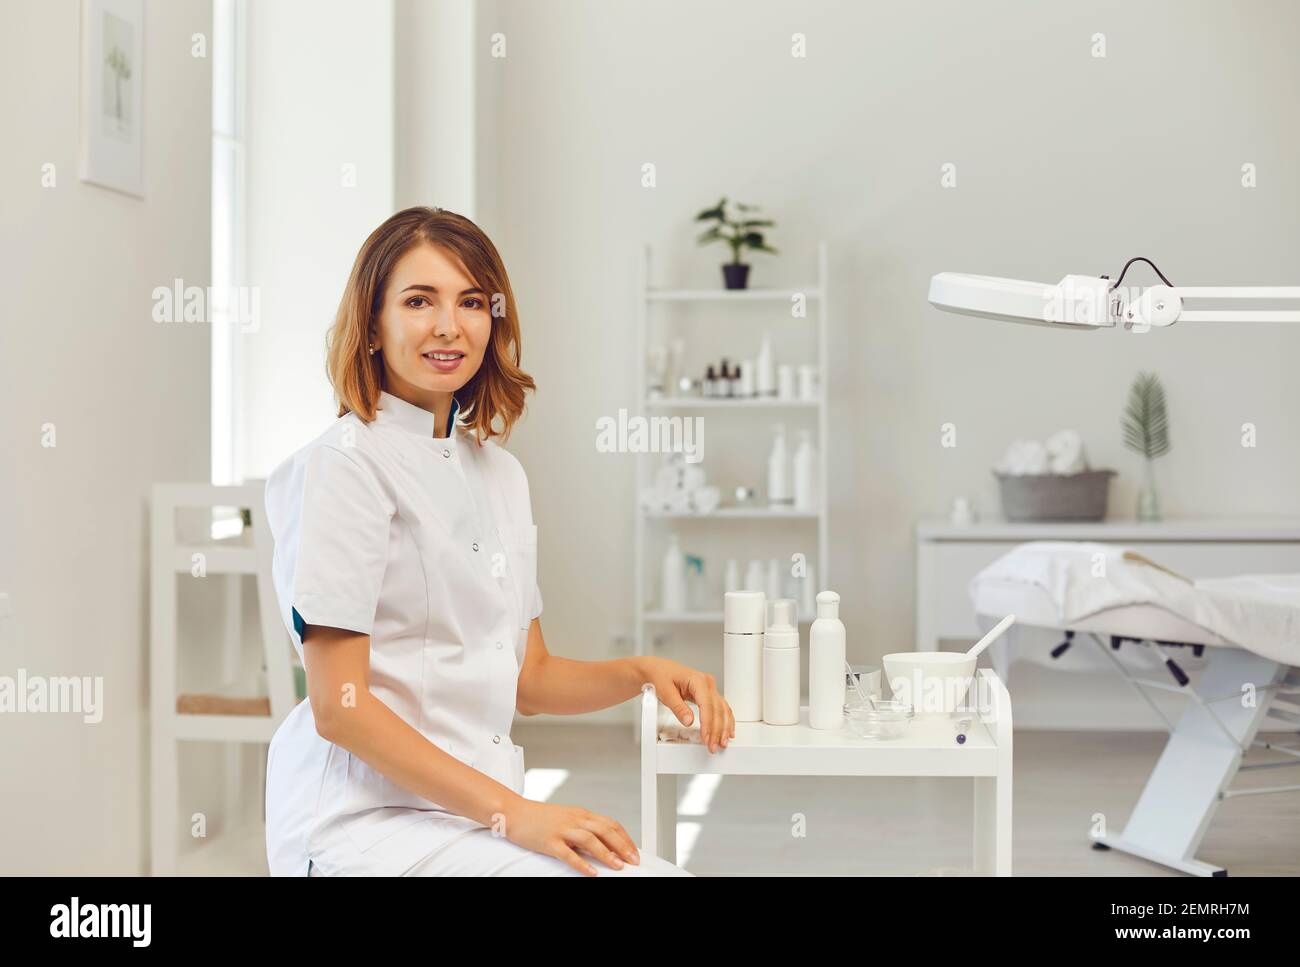 Cosmetologist or dermatologist looking at camera in beauty salon with various cosmetics at background Stock Photo